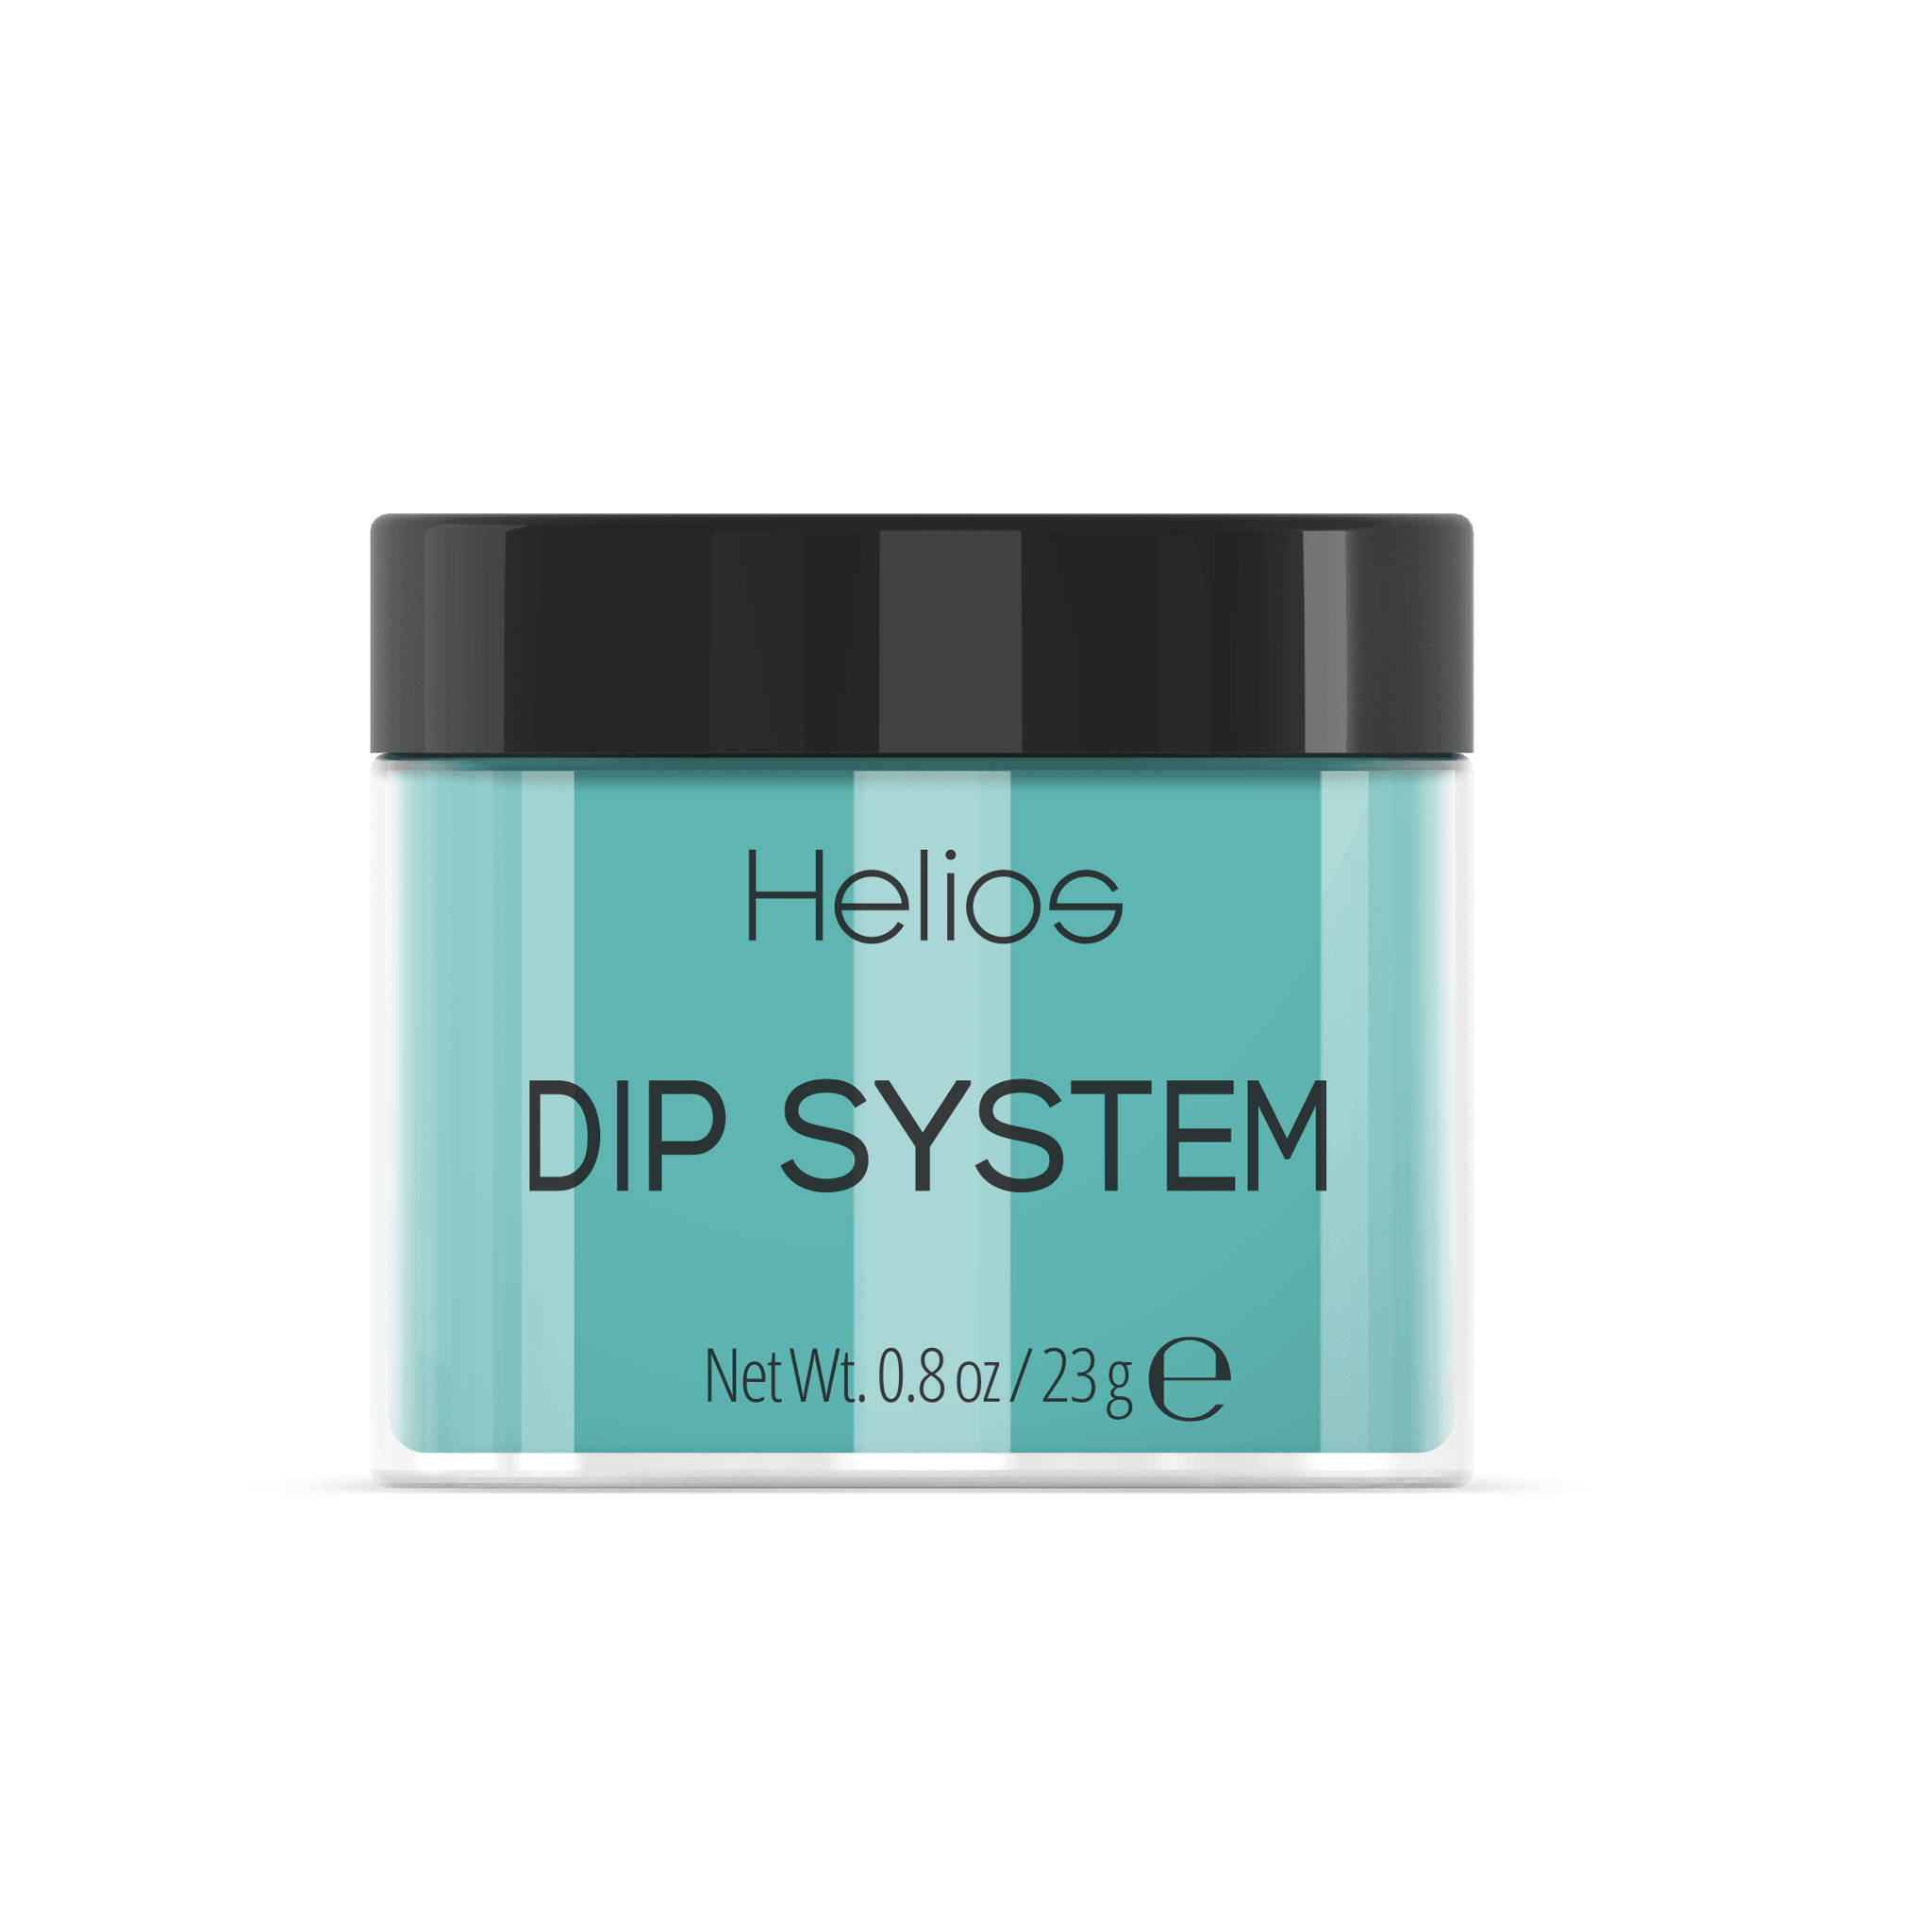 DIP SYSTEM - SO MINTY - Helios Nail Systems